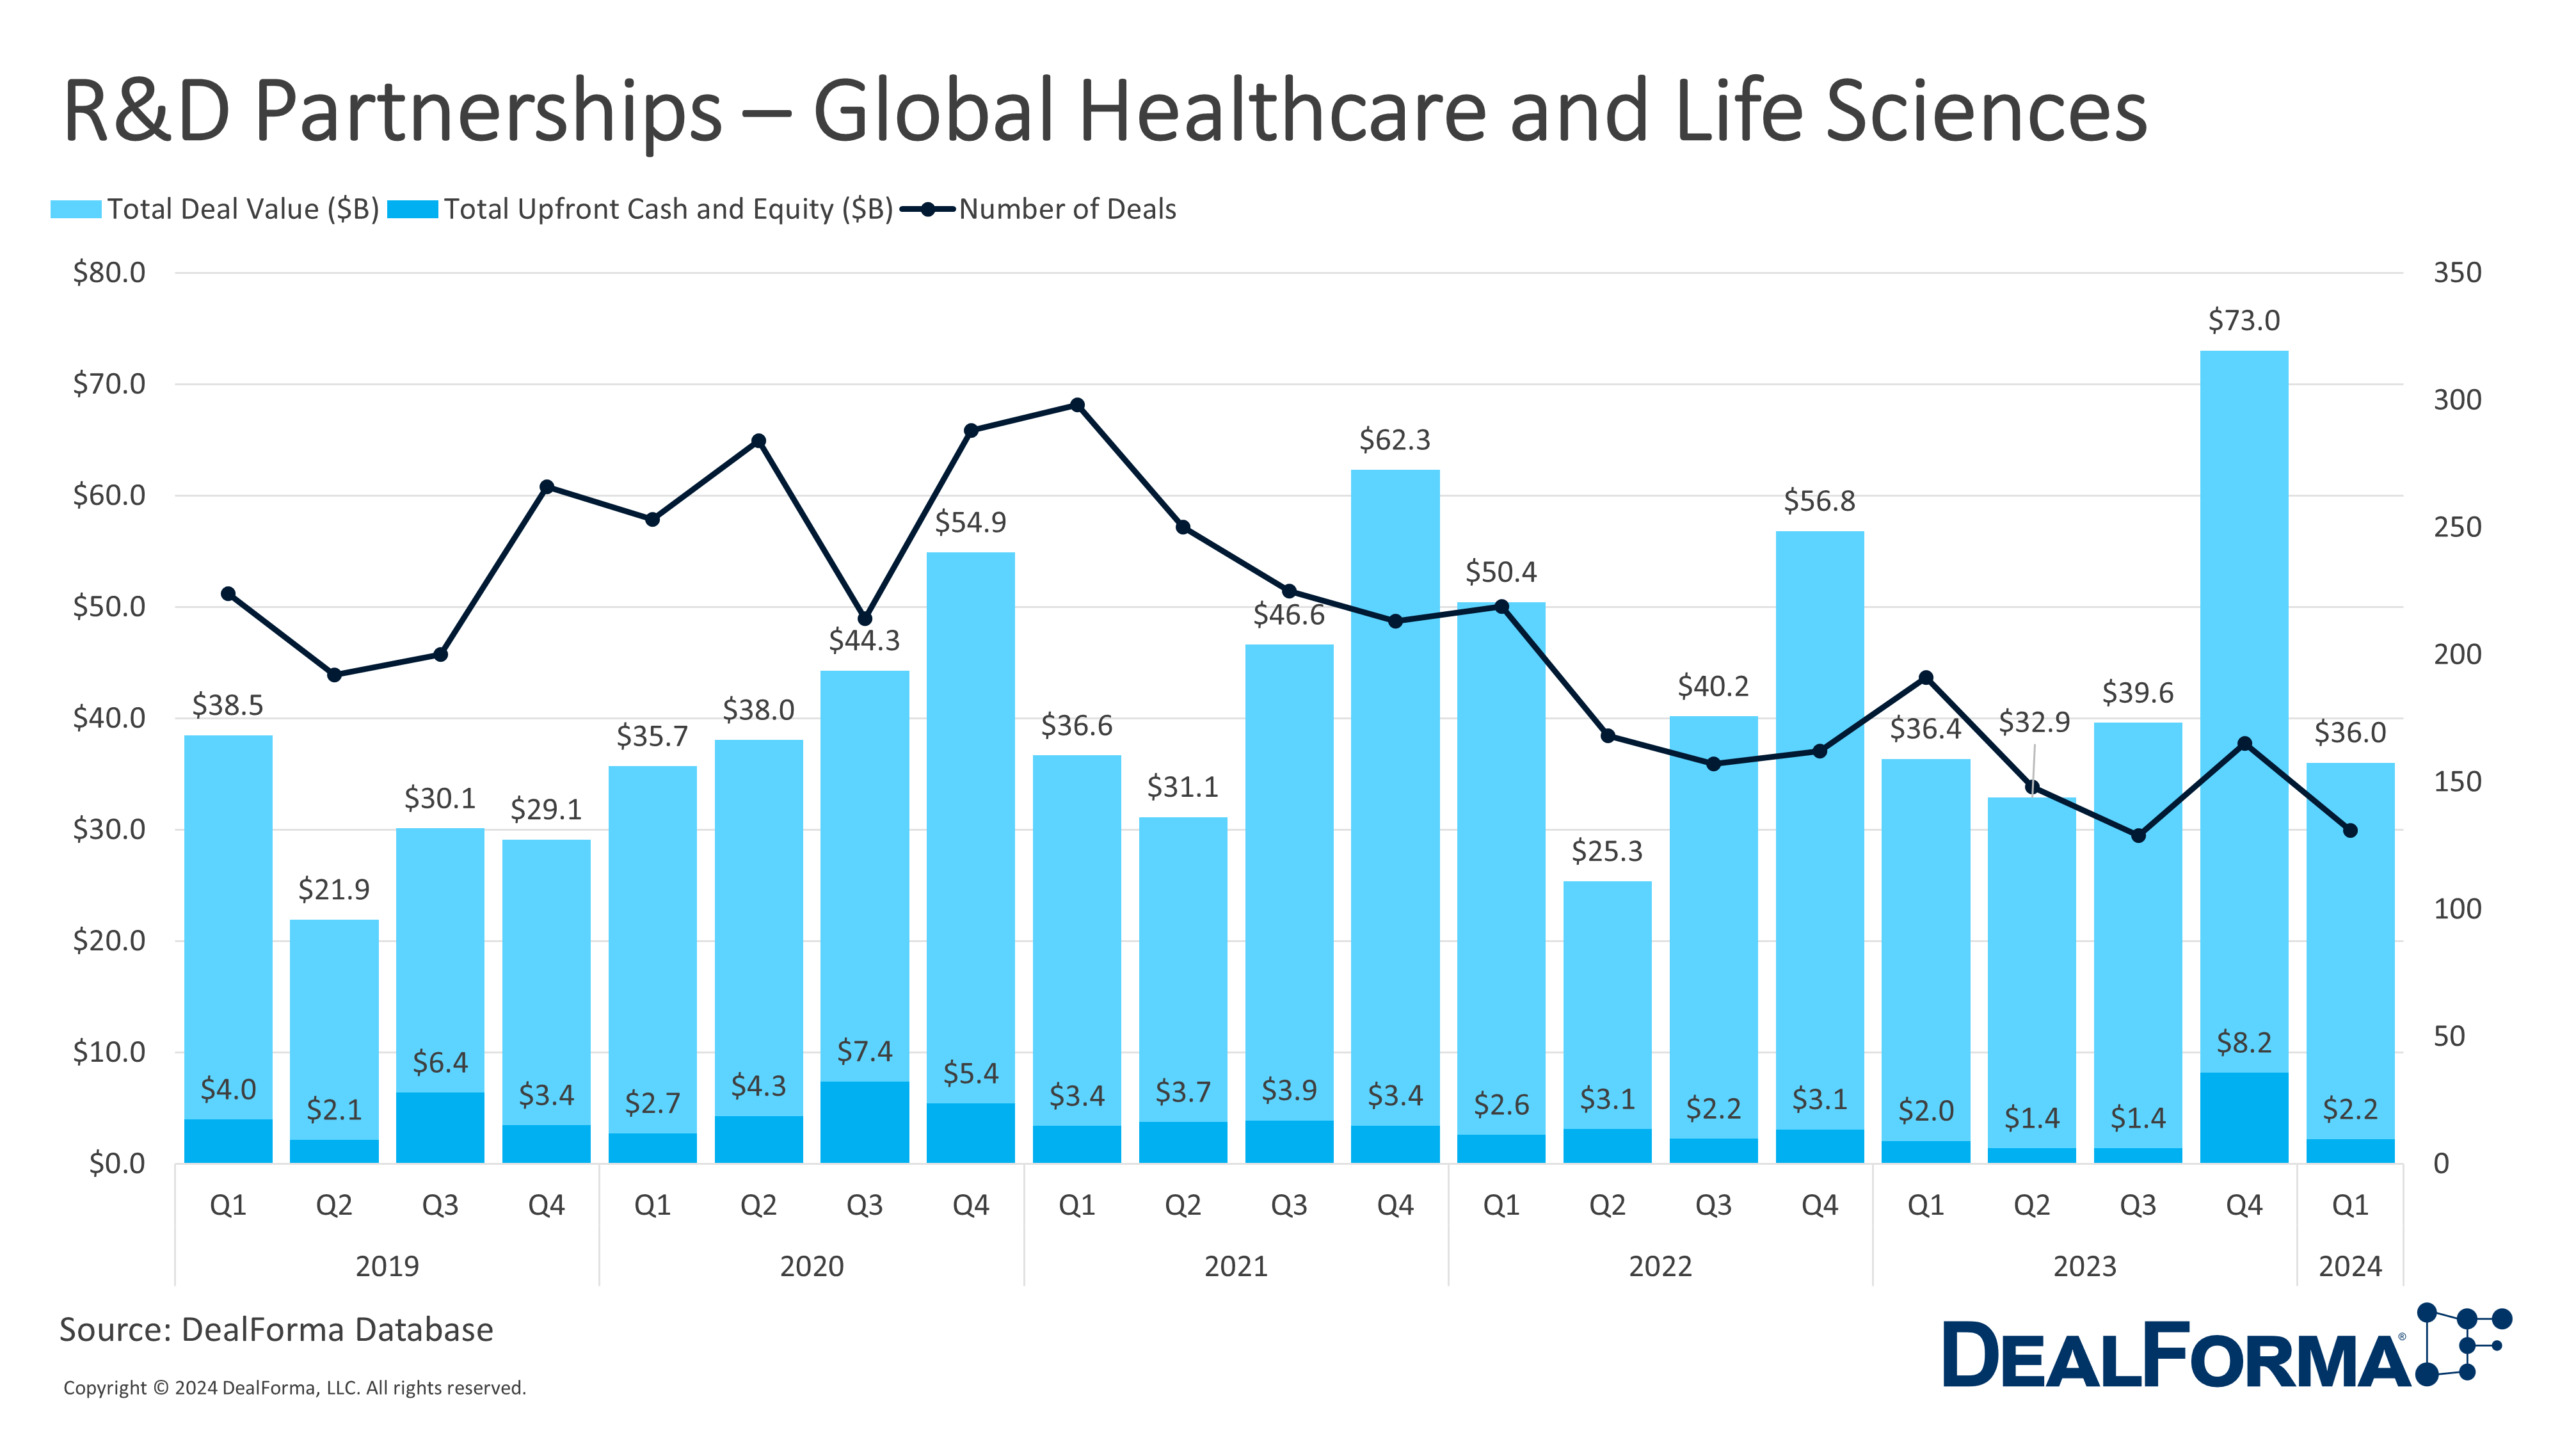 R&D Partnerships – Global Healthcare and Life Sciences